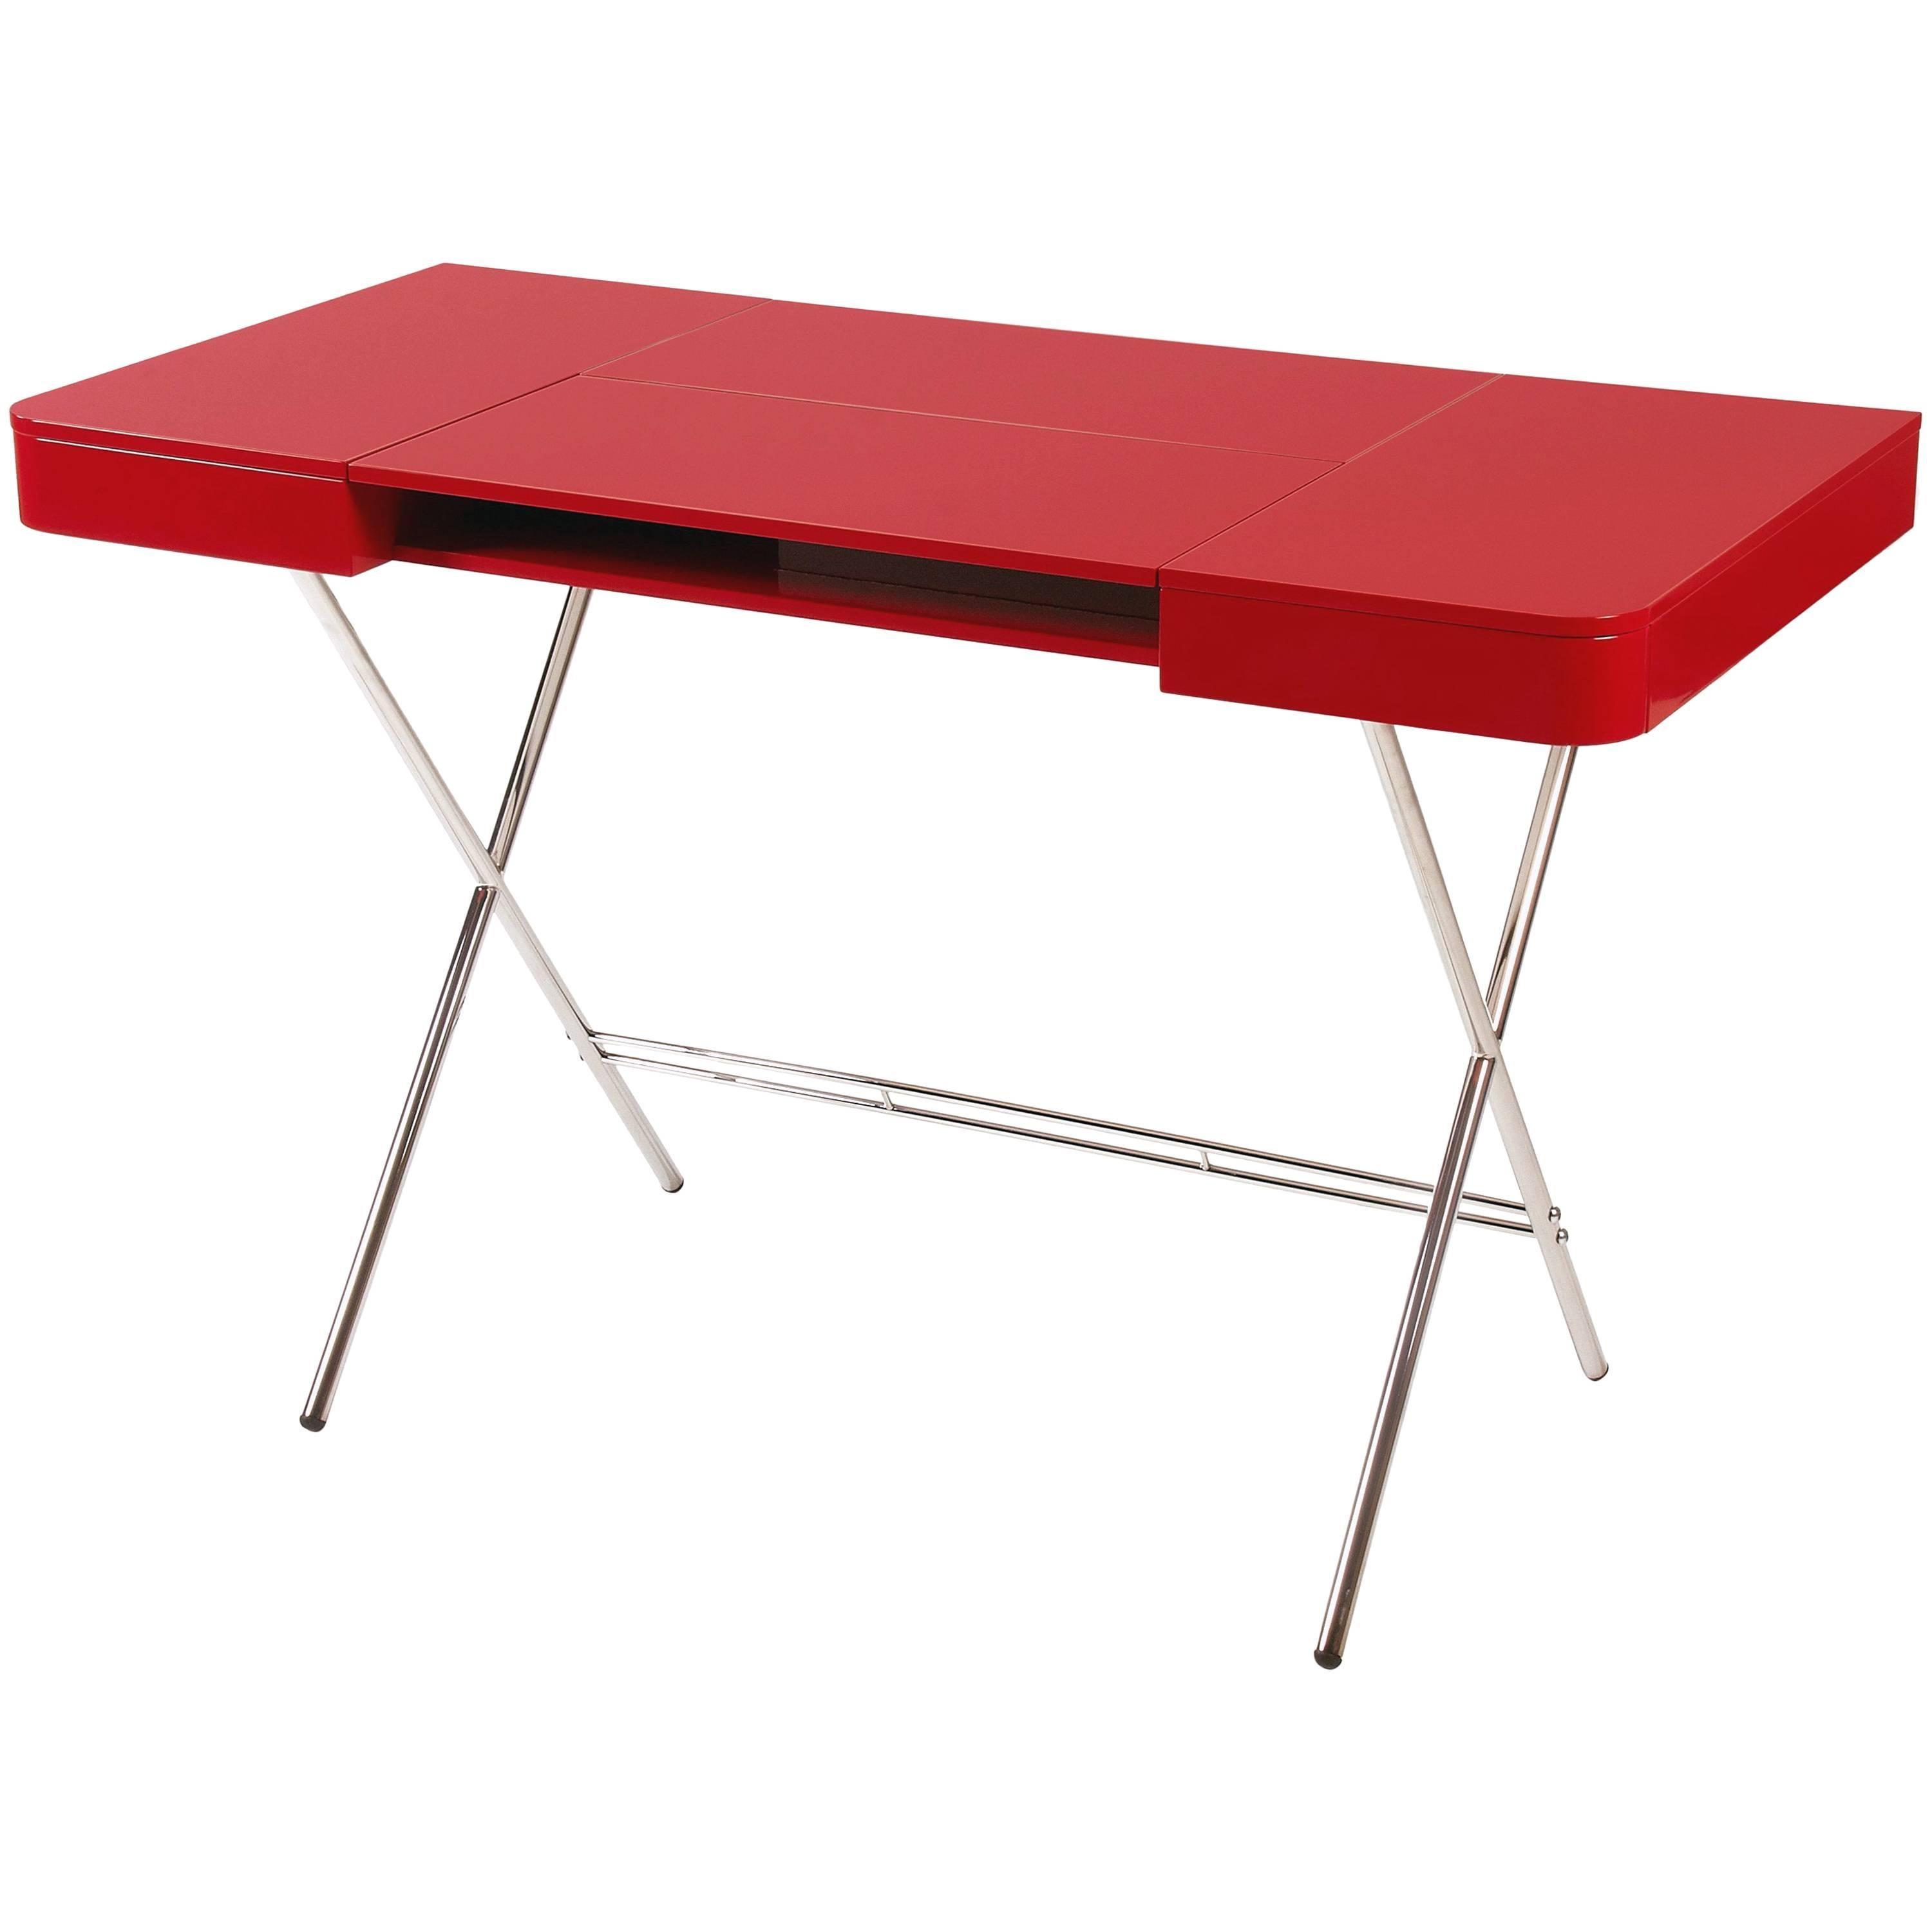 Contemporary Cosimo Desk by Marco Zanuso Jr. Red Glossy Lacquered Top For Sale